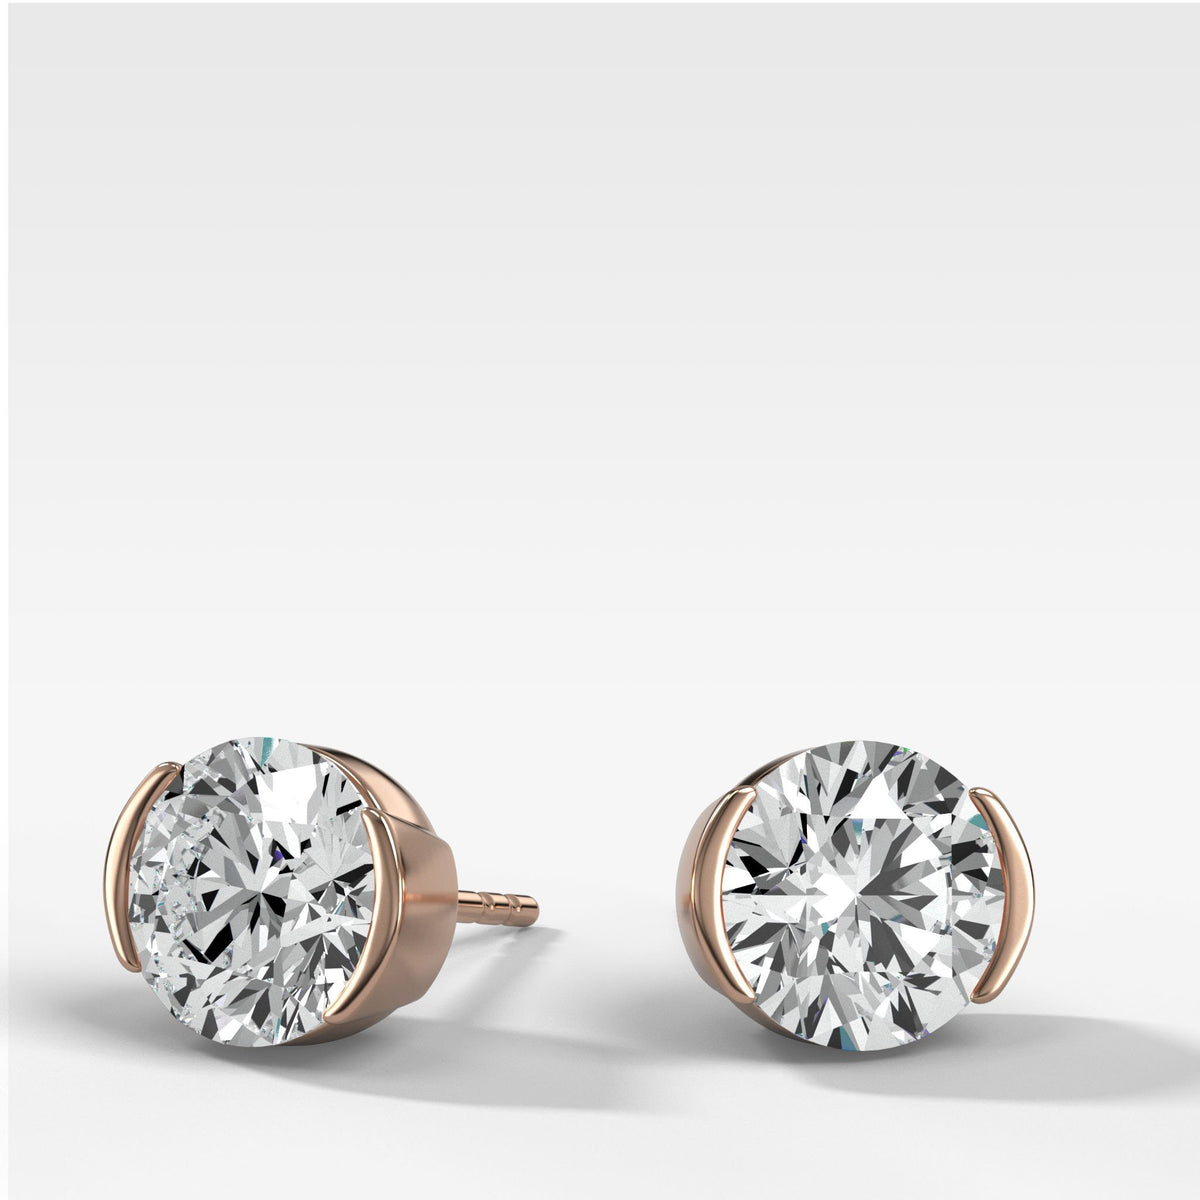 Round Cut Half Bezel Studs by Good Stone in Rose Gold